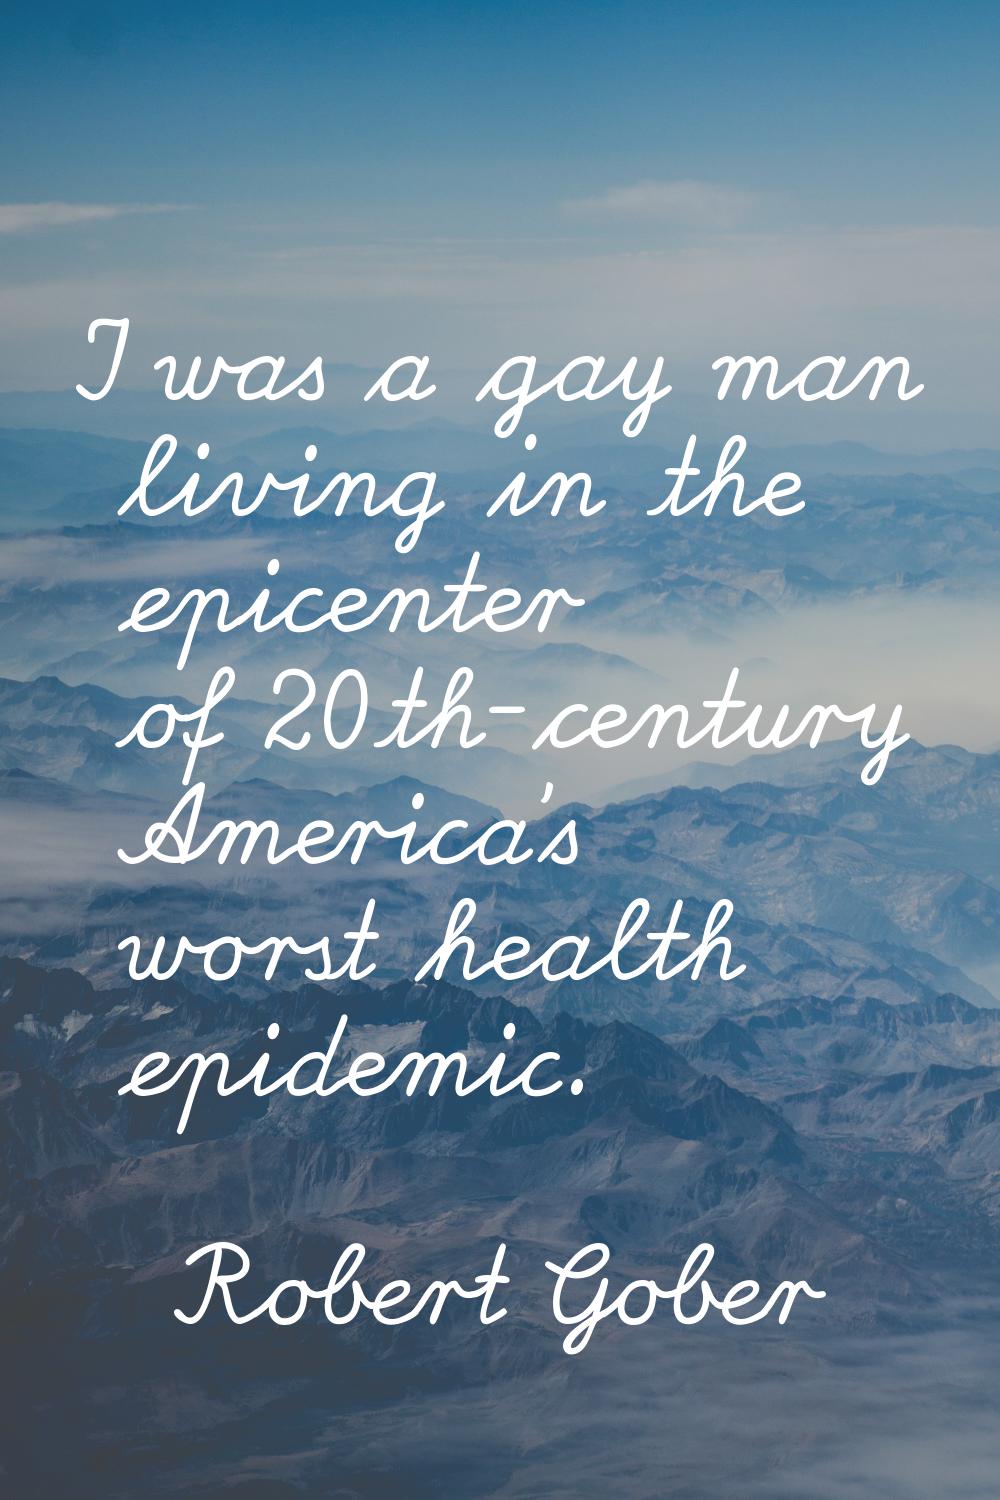 I was a gay man living in the epicenter of 20th-century America's worst health epidemic.